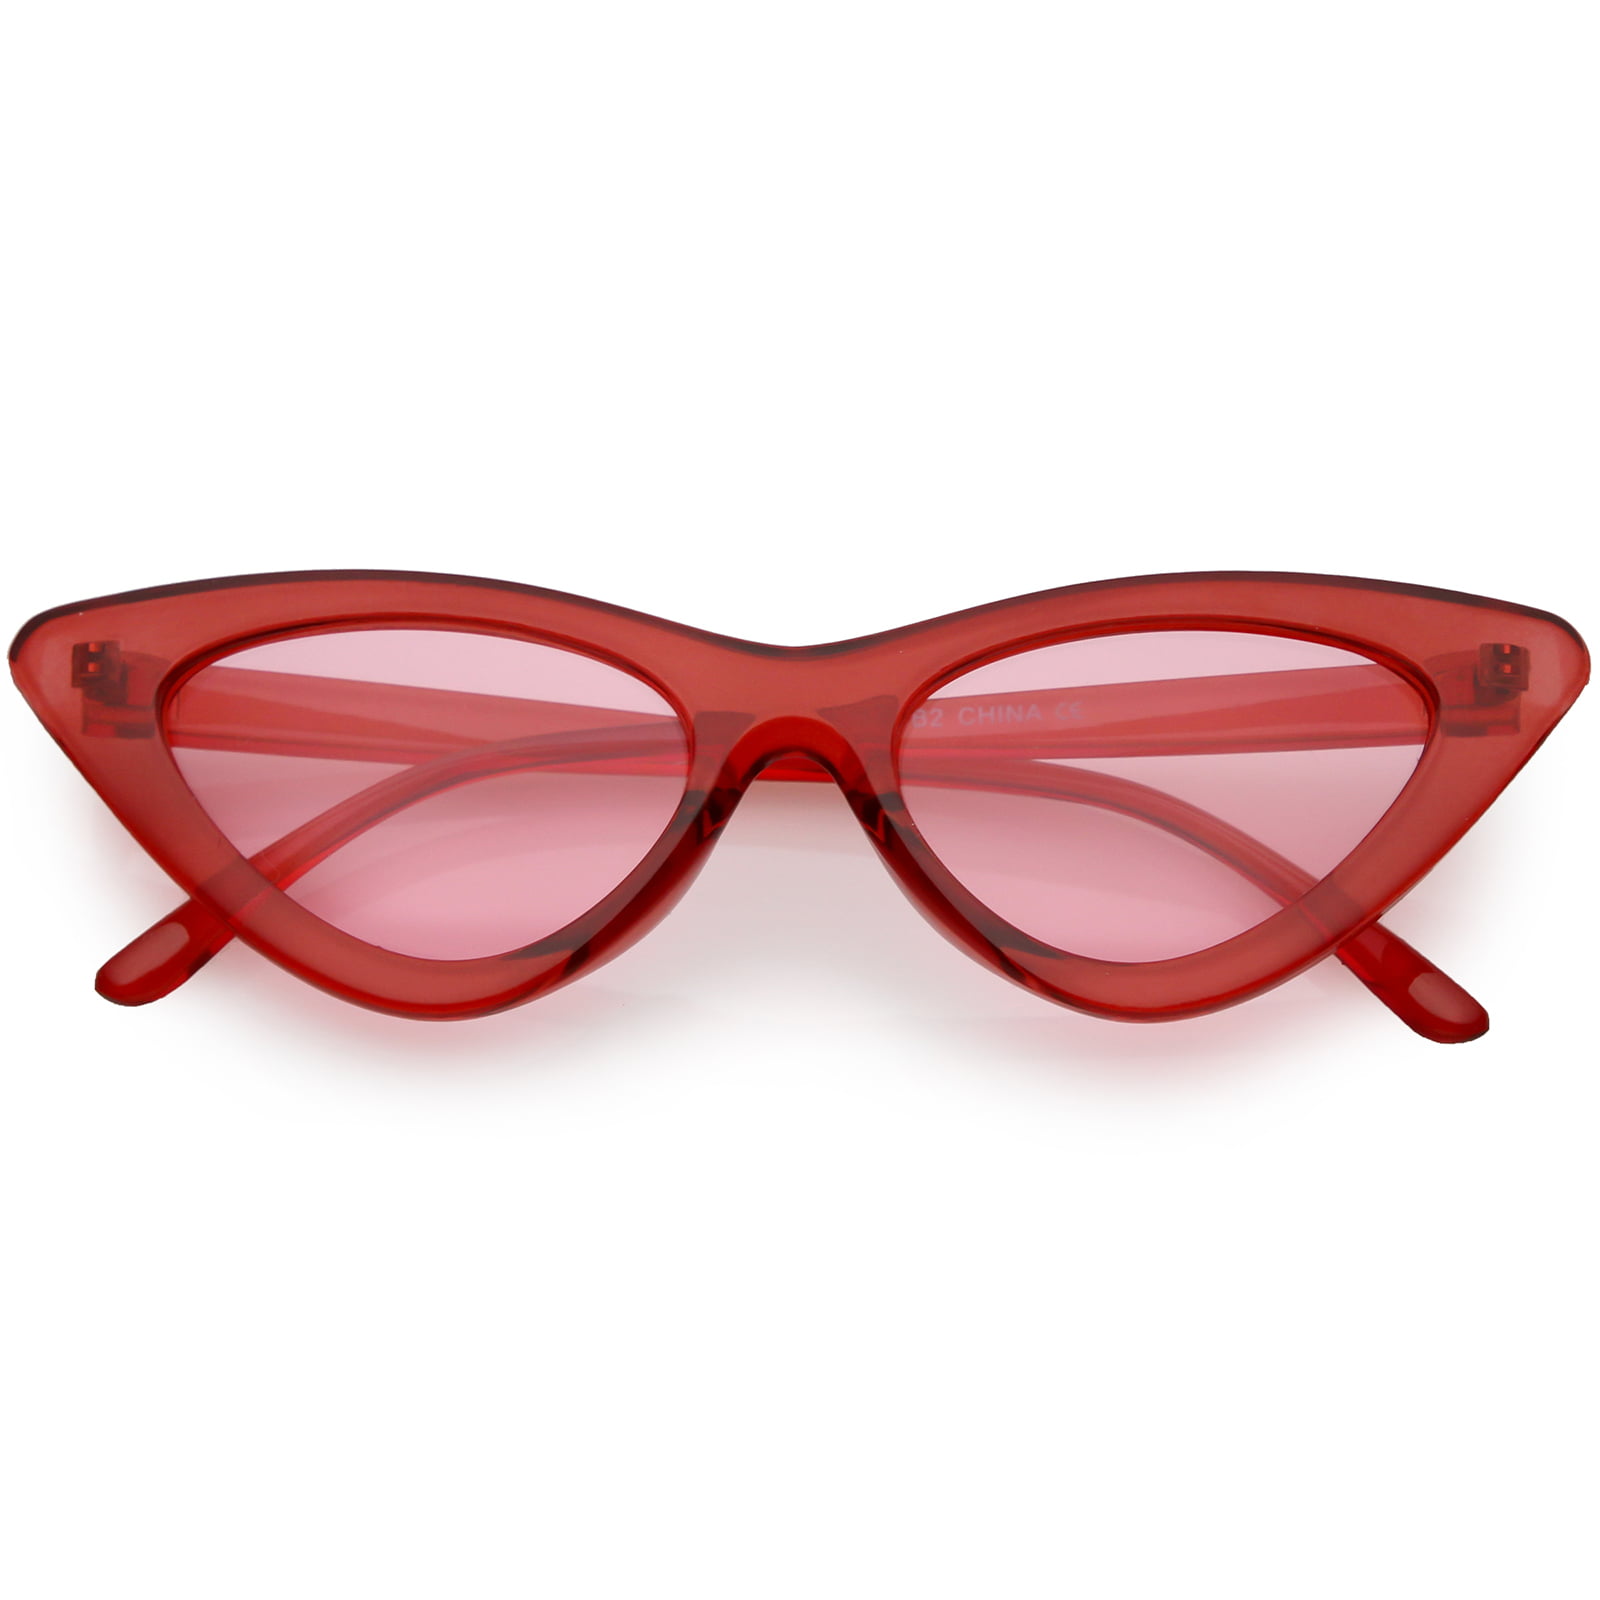 Womens Exaggerated Translucent Cat Eye Sunglasses Color Tinted Lens 48mm Red Pink